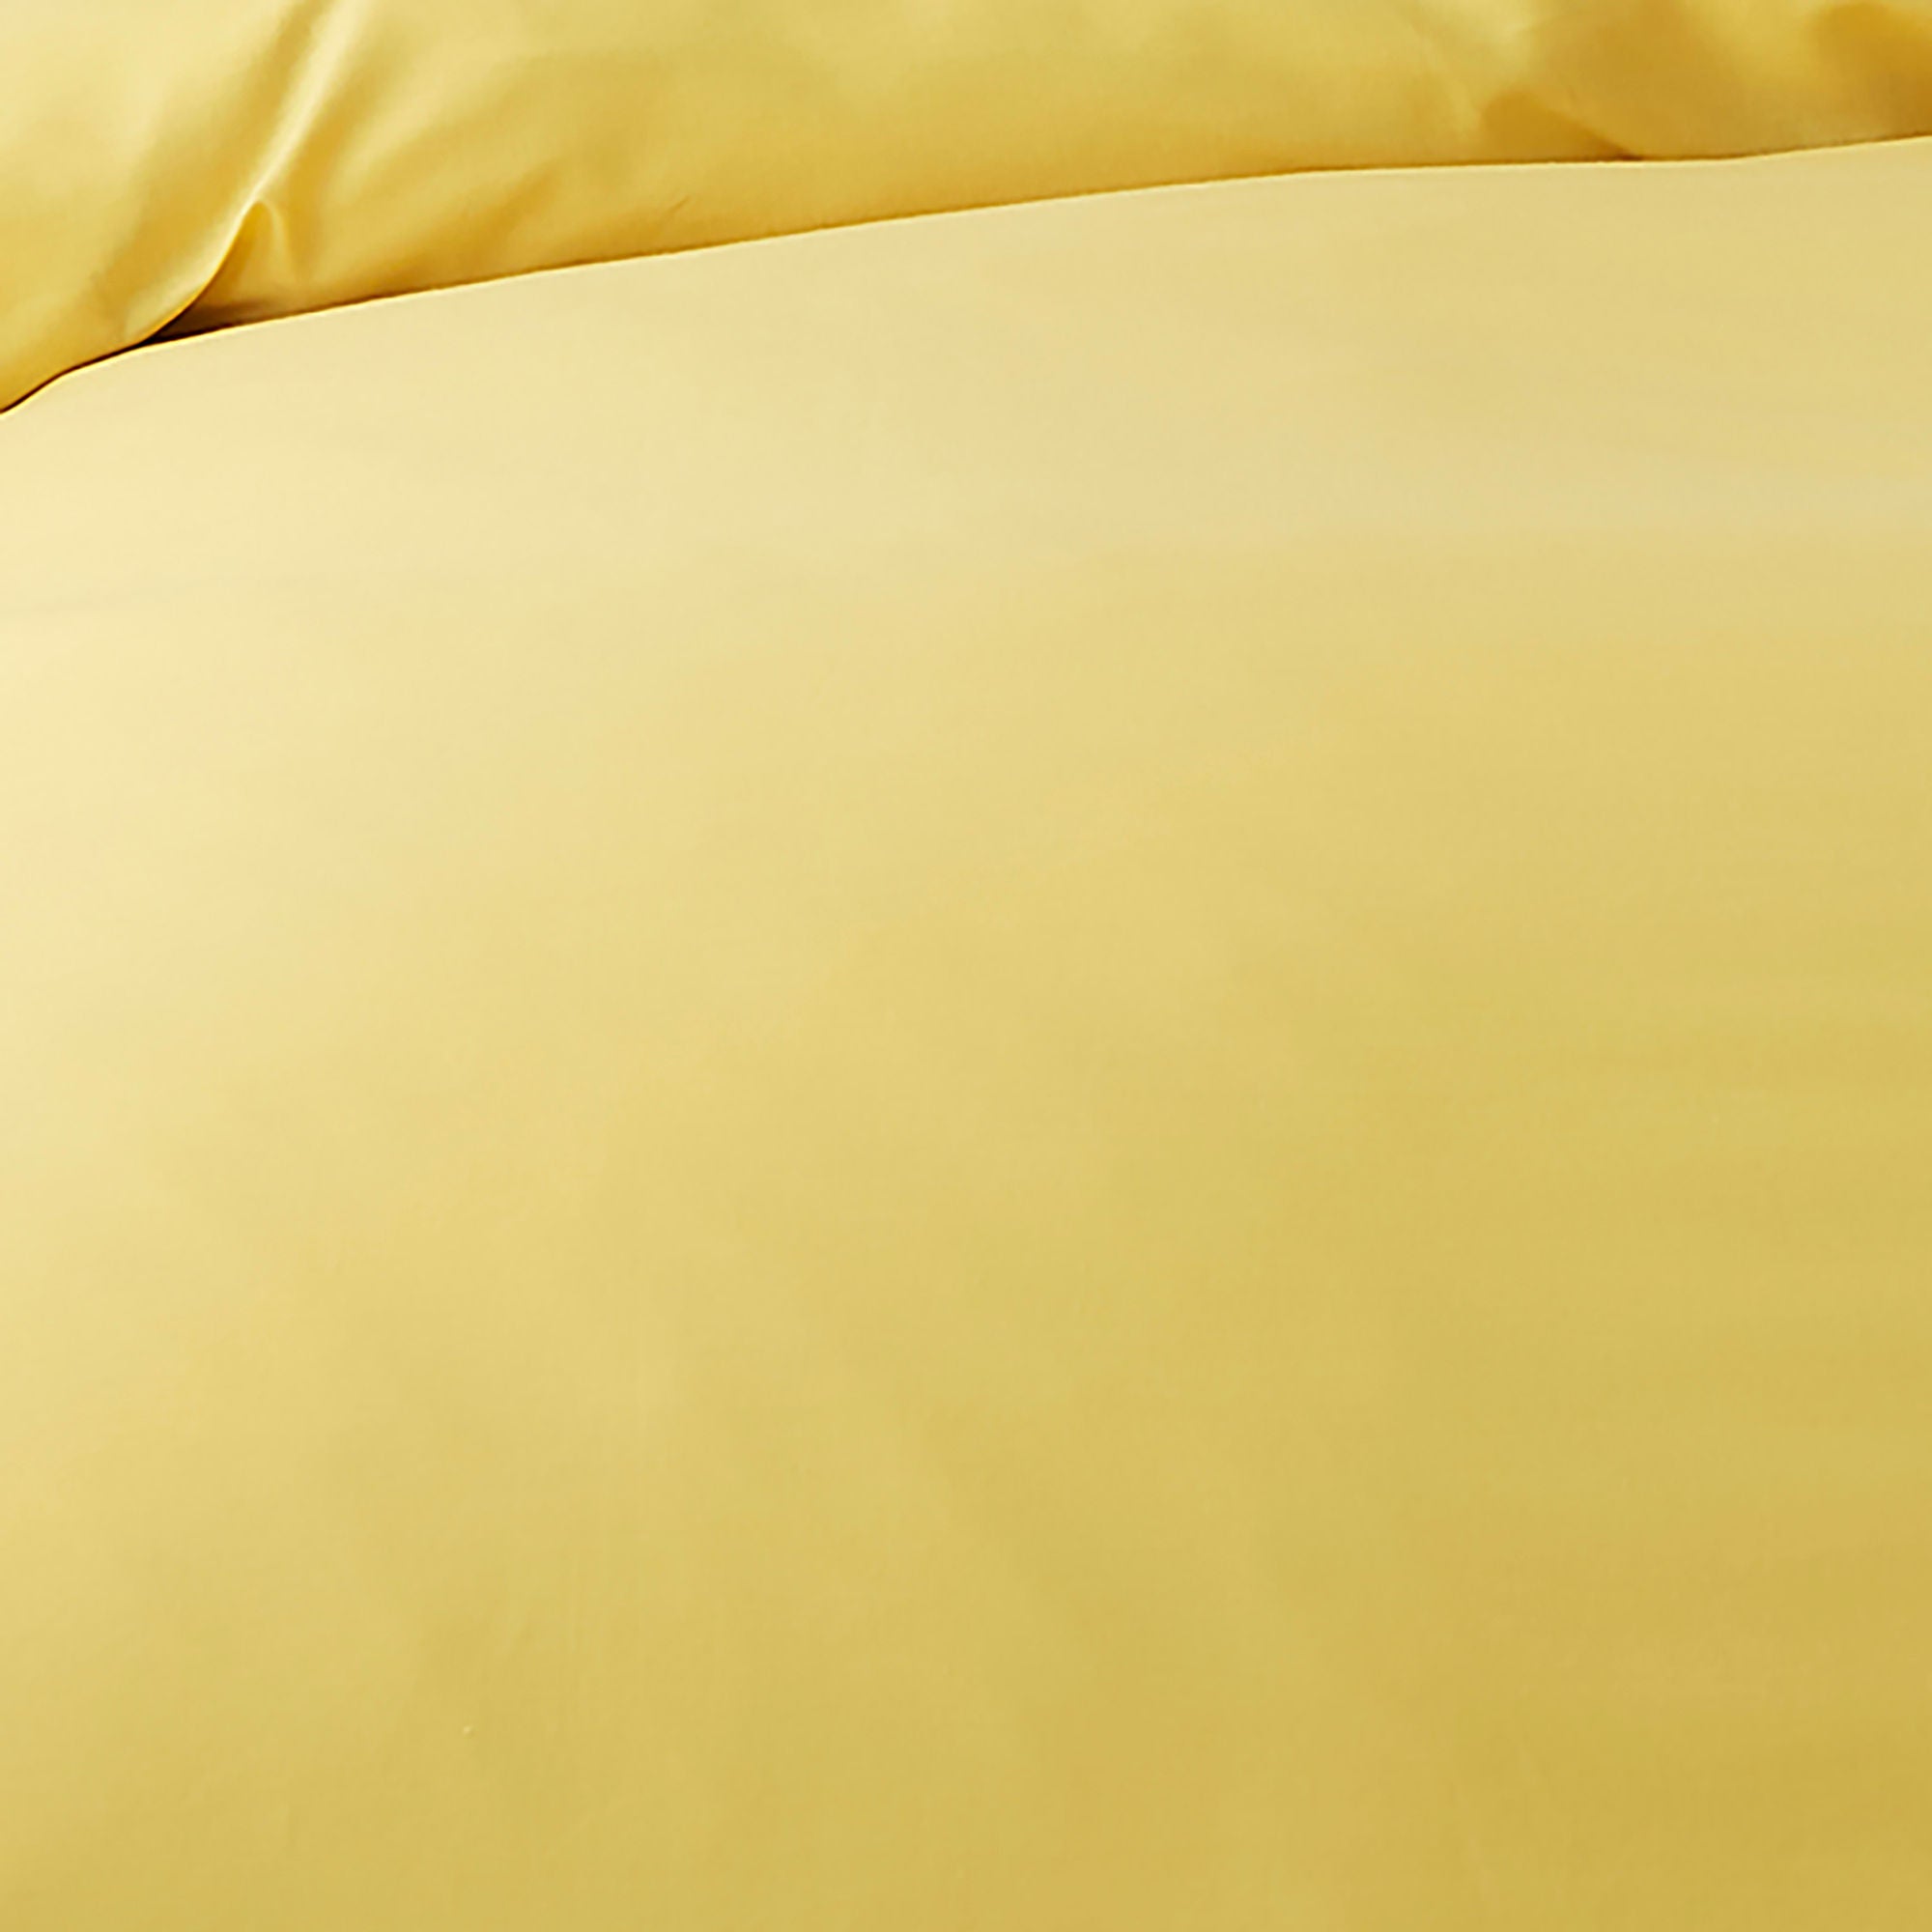 Appletree Pure Cotton Duvet Cover Set by Appletree Style in Yellow - Duvet Cover Set - Appletree Style